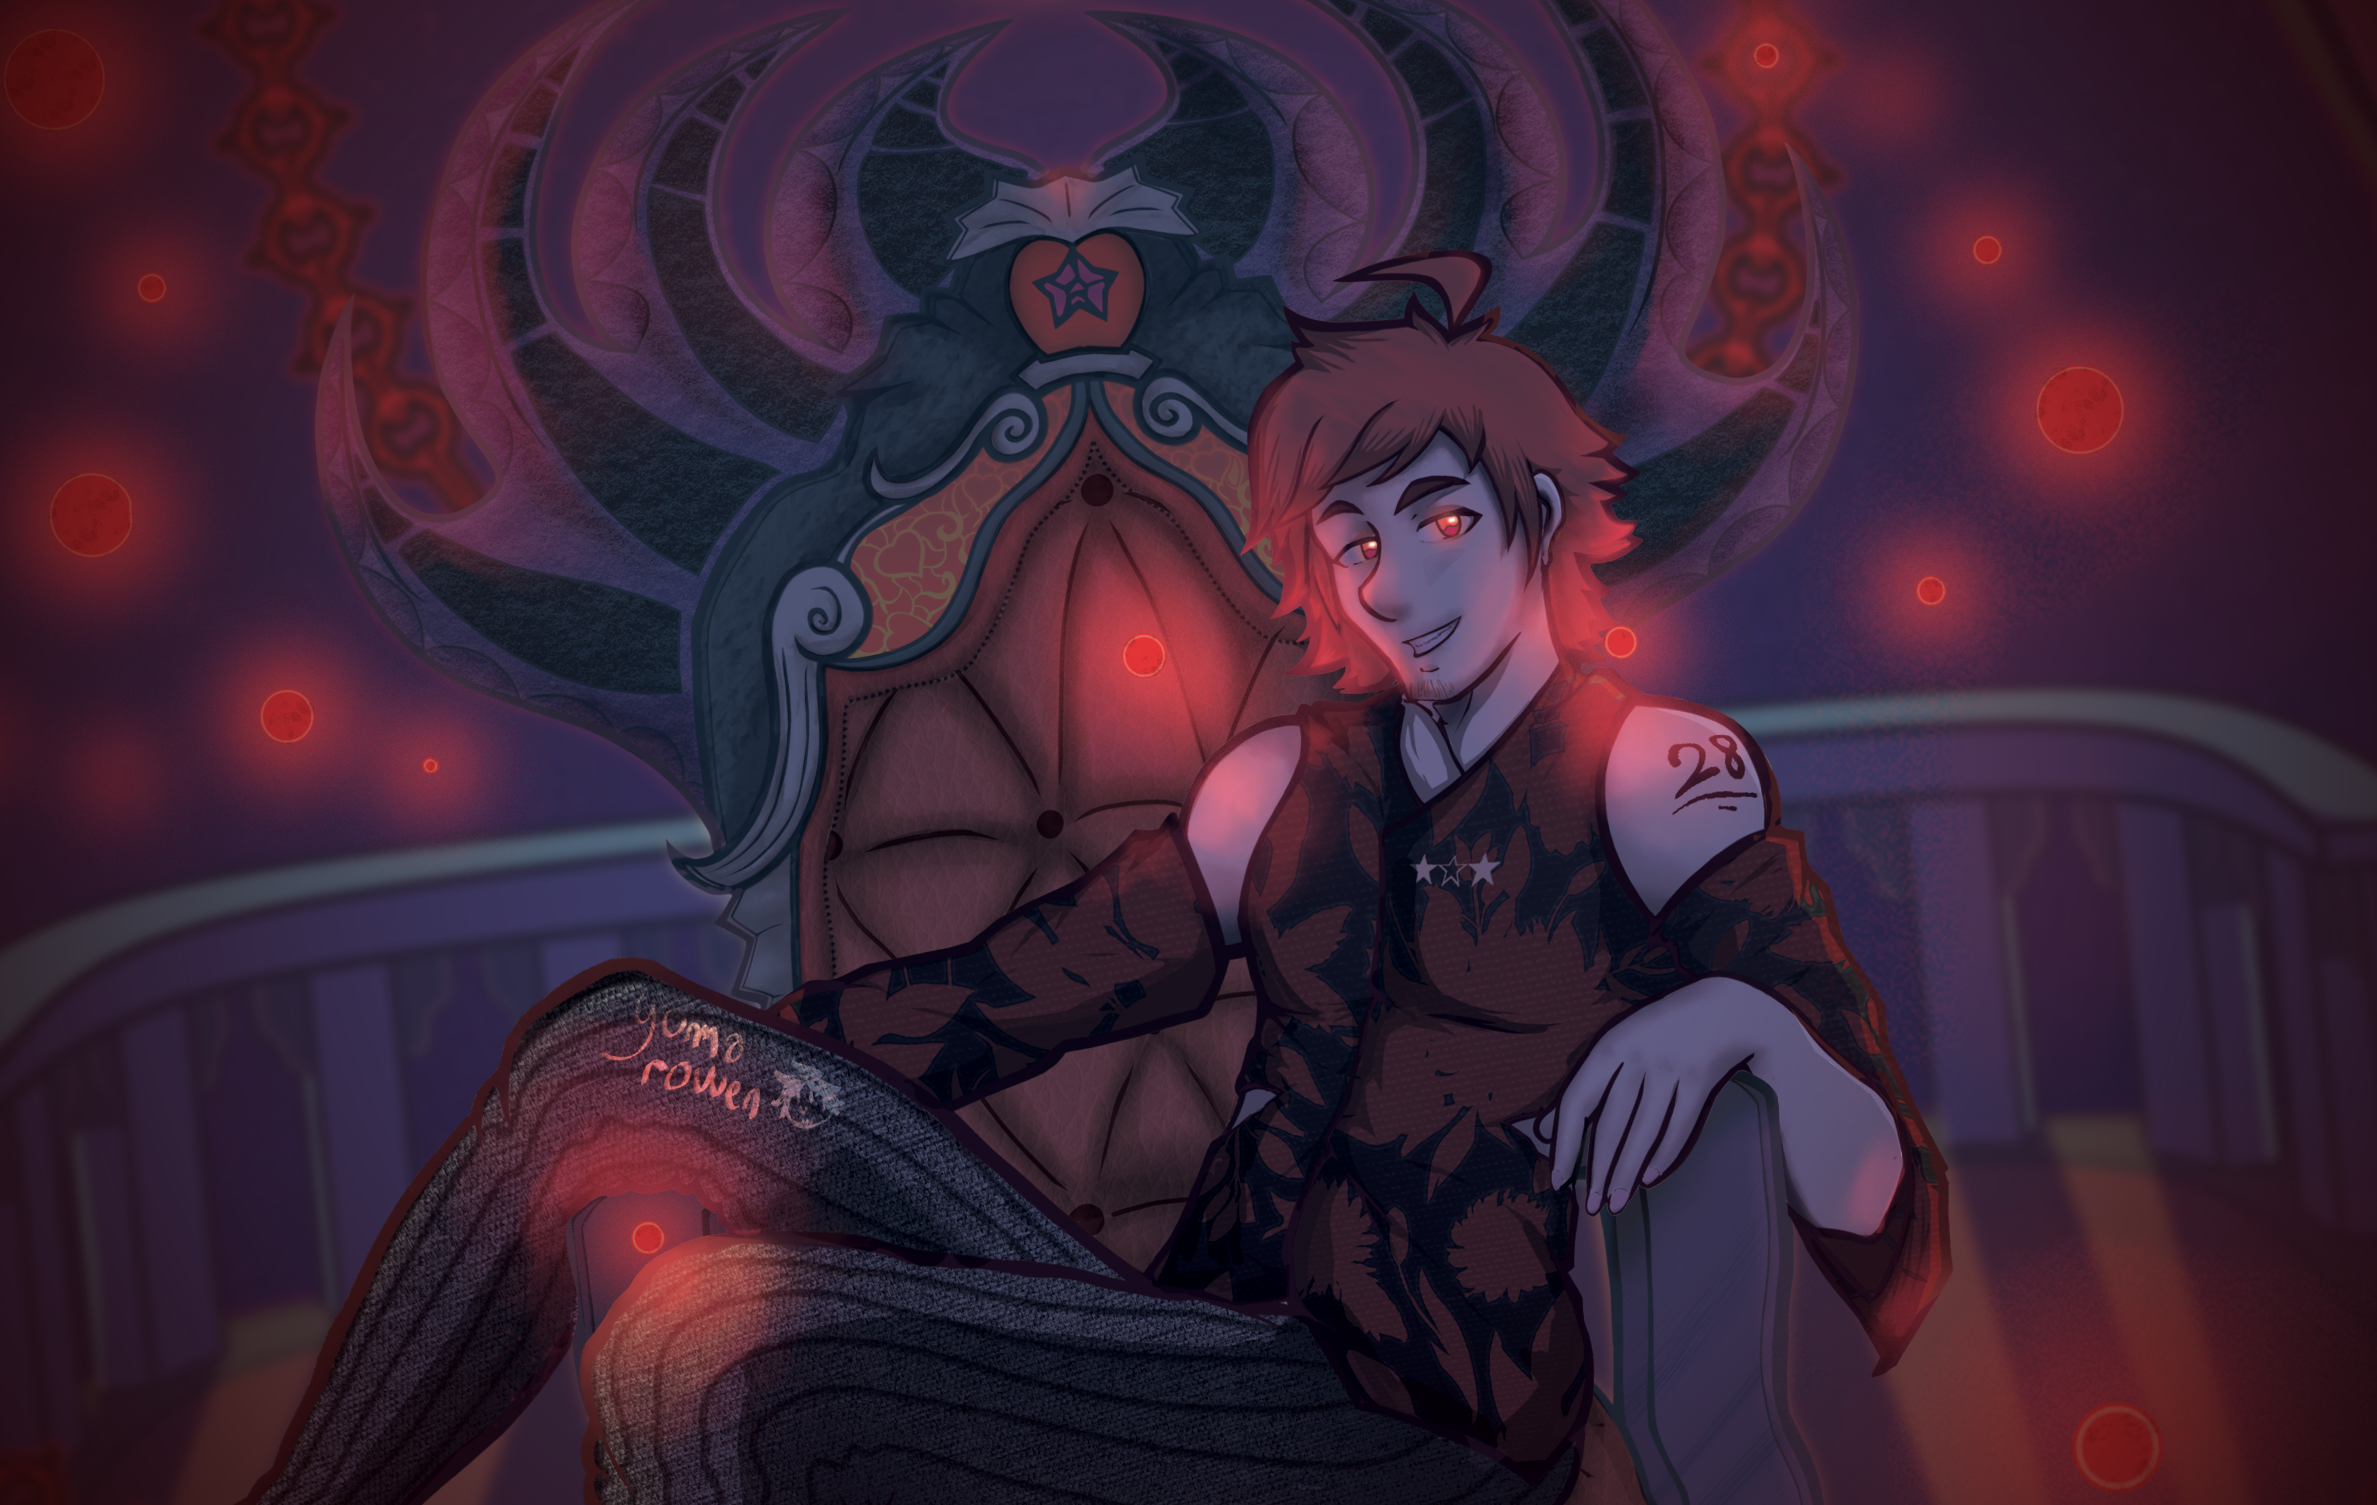 An illustration of Teru Tendo, with some dark lighting; sitting on a throne, looking at the viewer seductively or in a threatening fashion. This was produced as Photoshop and Shading practice.